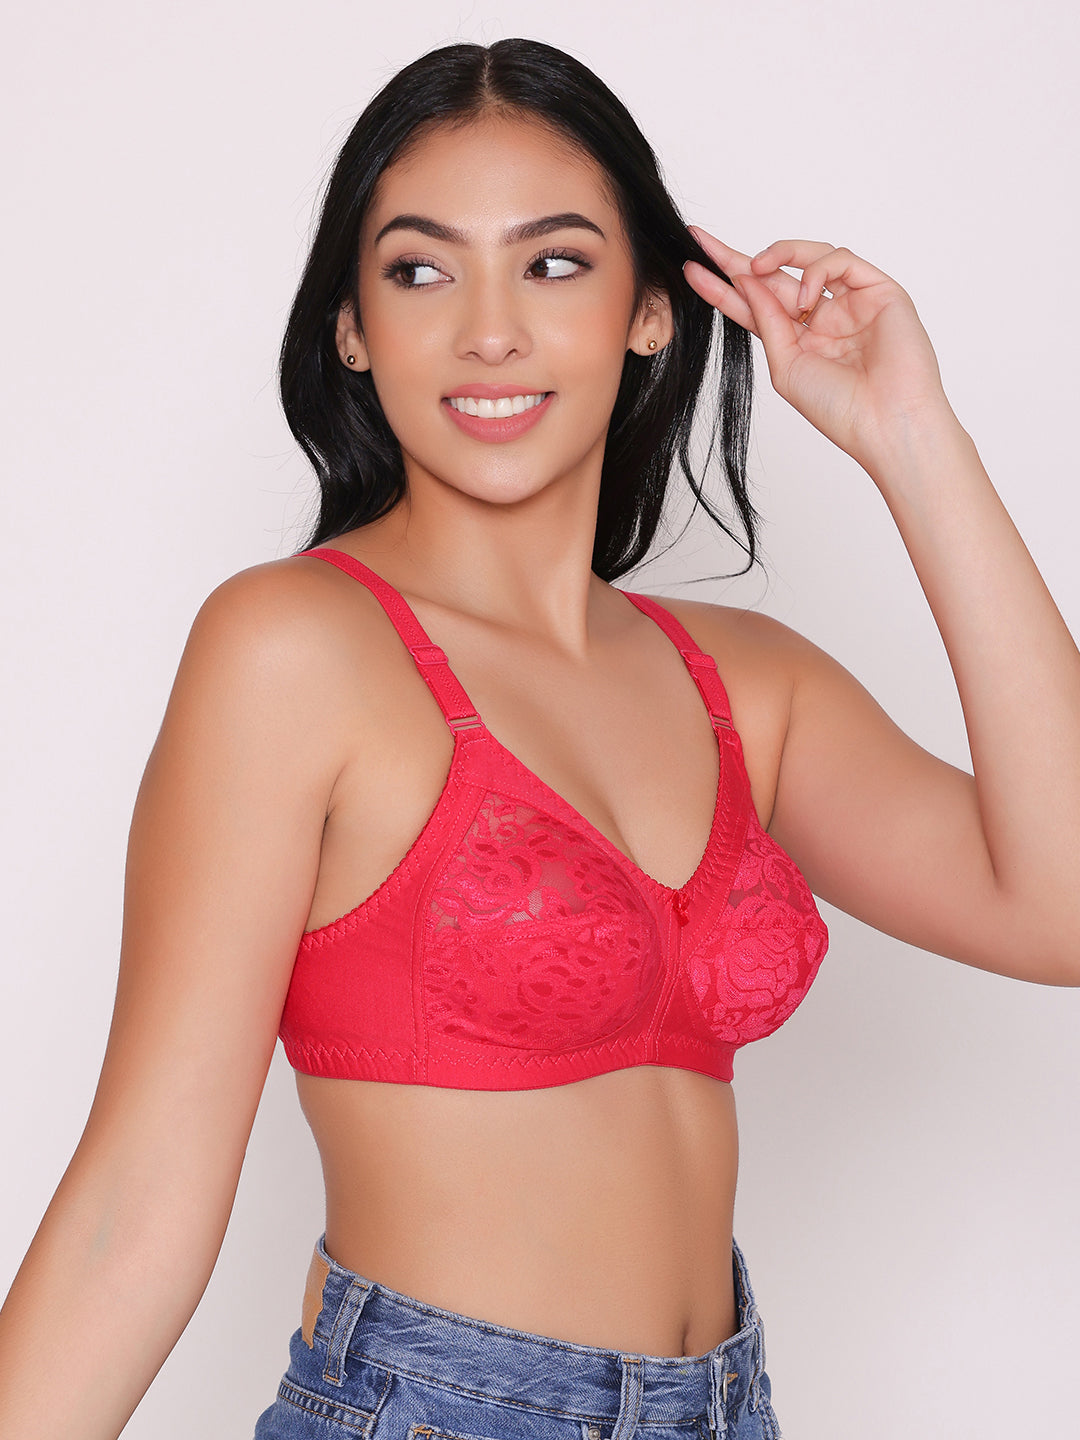 Women's Non Padded Full Coverage Net Bra (Pack of 2)-Thea INKURV | 20% Off on Our Exclusive Range of Bra,Shapewear & Sports Bra